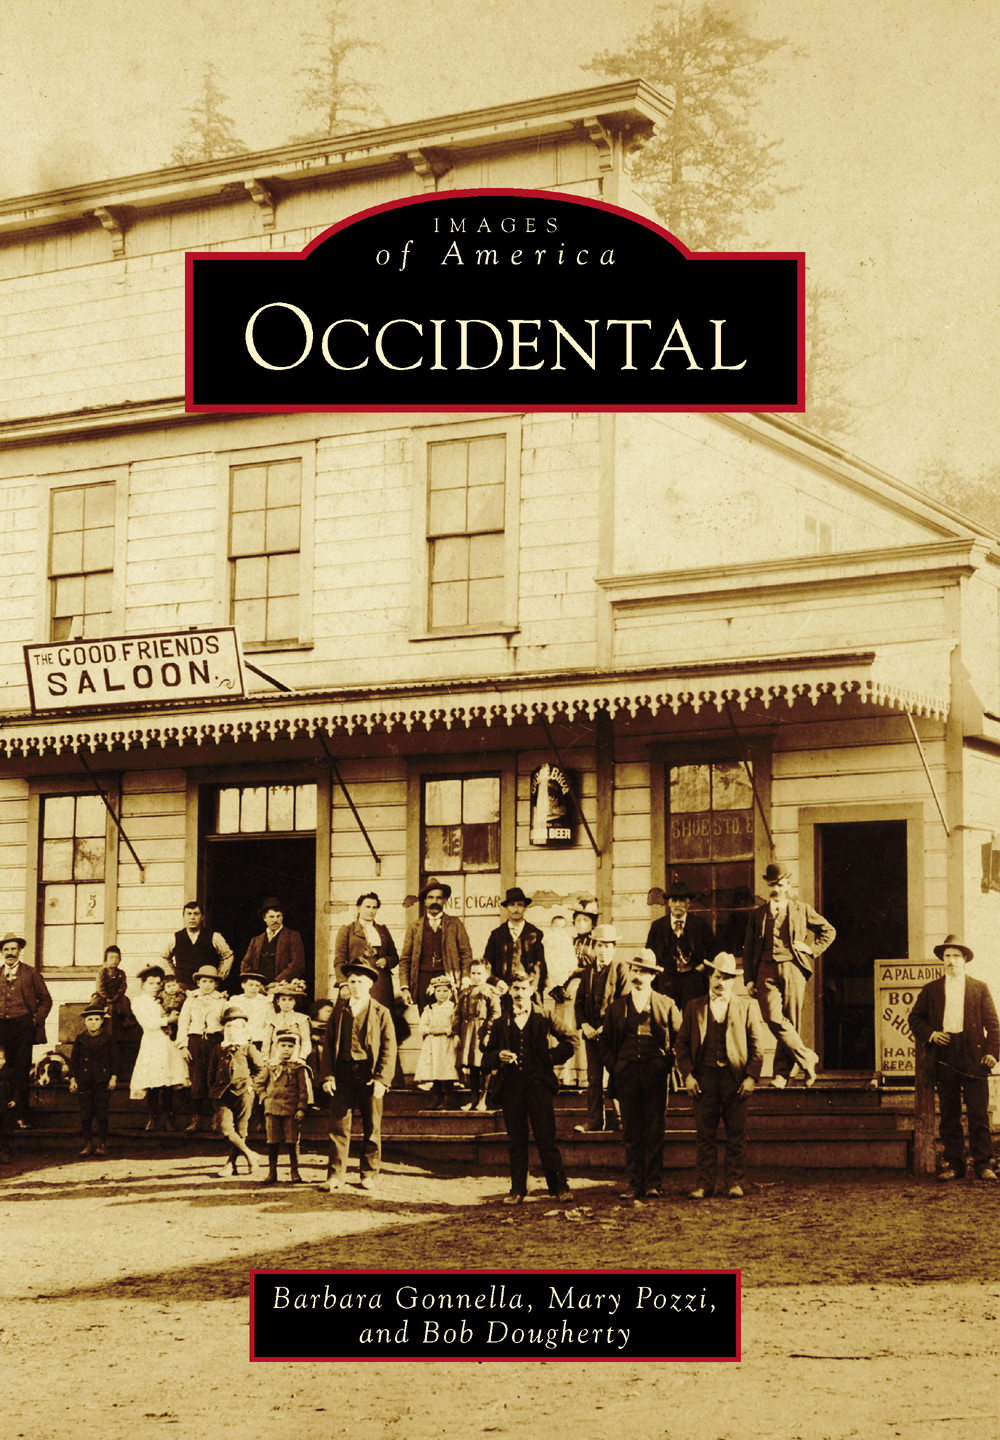 This image is the cover for the book Occidental, Images of America